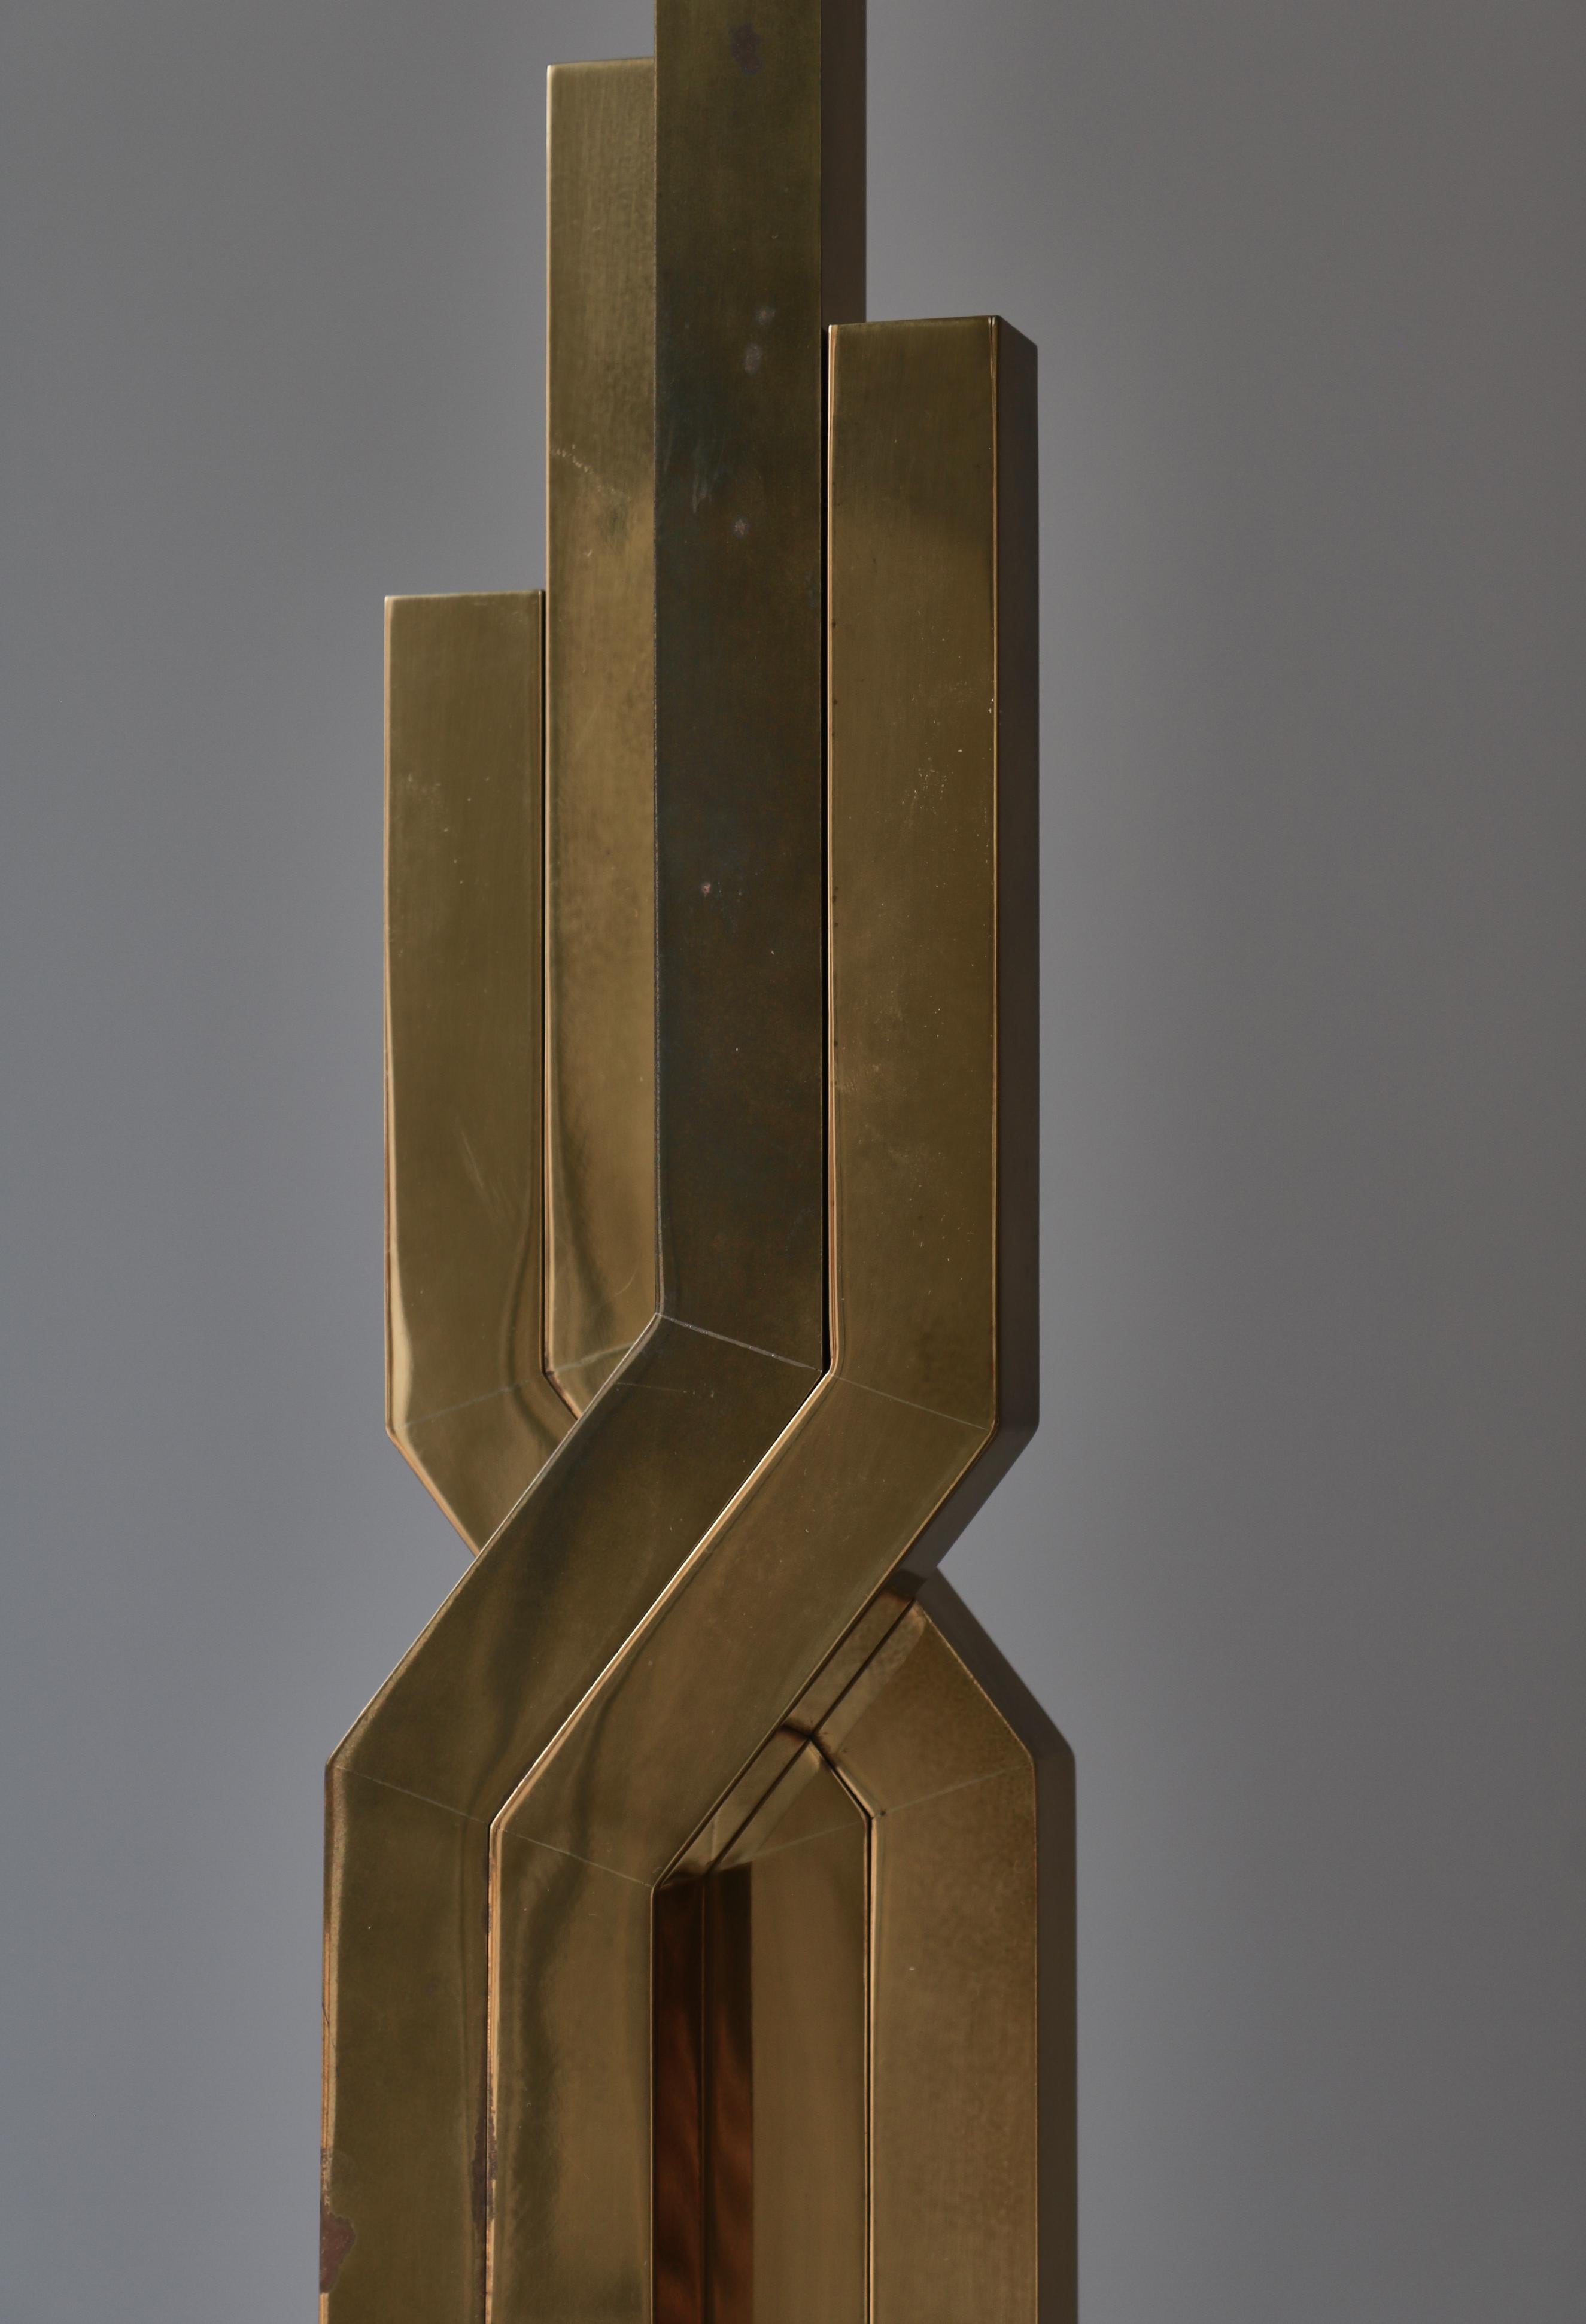 Large Danish Modern Table Lamps in Brass by Svend Aage Holm-Sørensen, 1960s For Sale 10